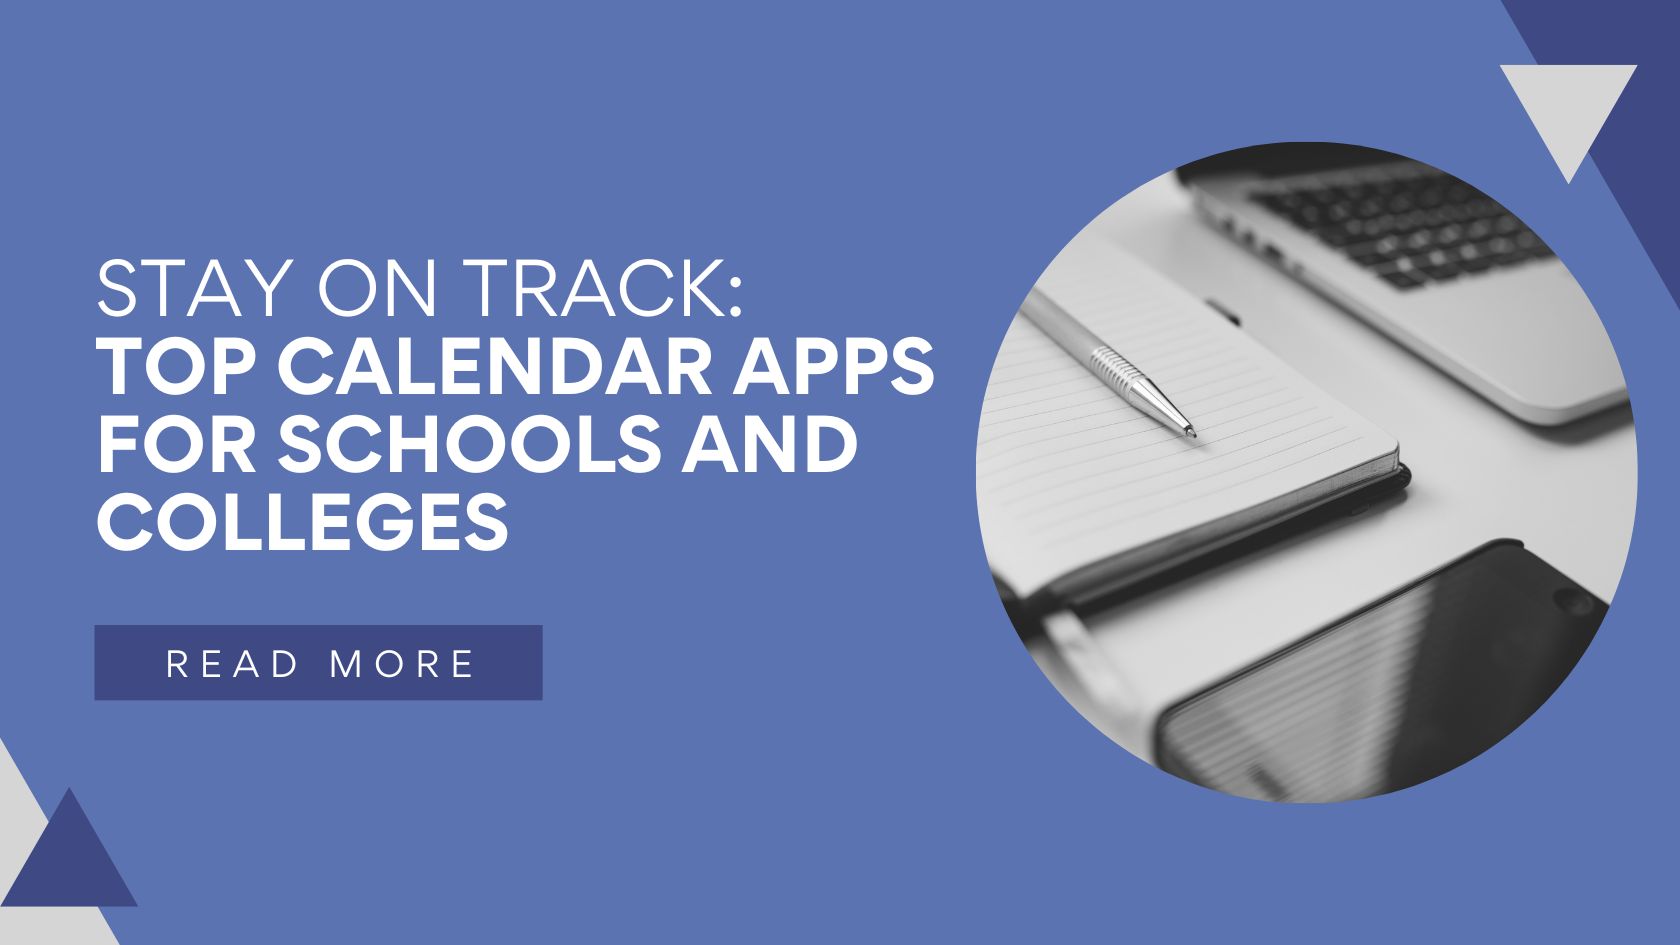 Stay on Track: Top Calendar Apps for Schools and Colleges